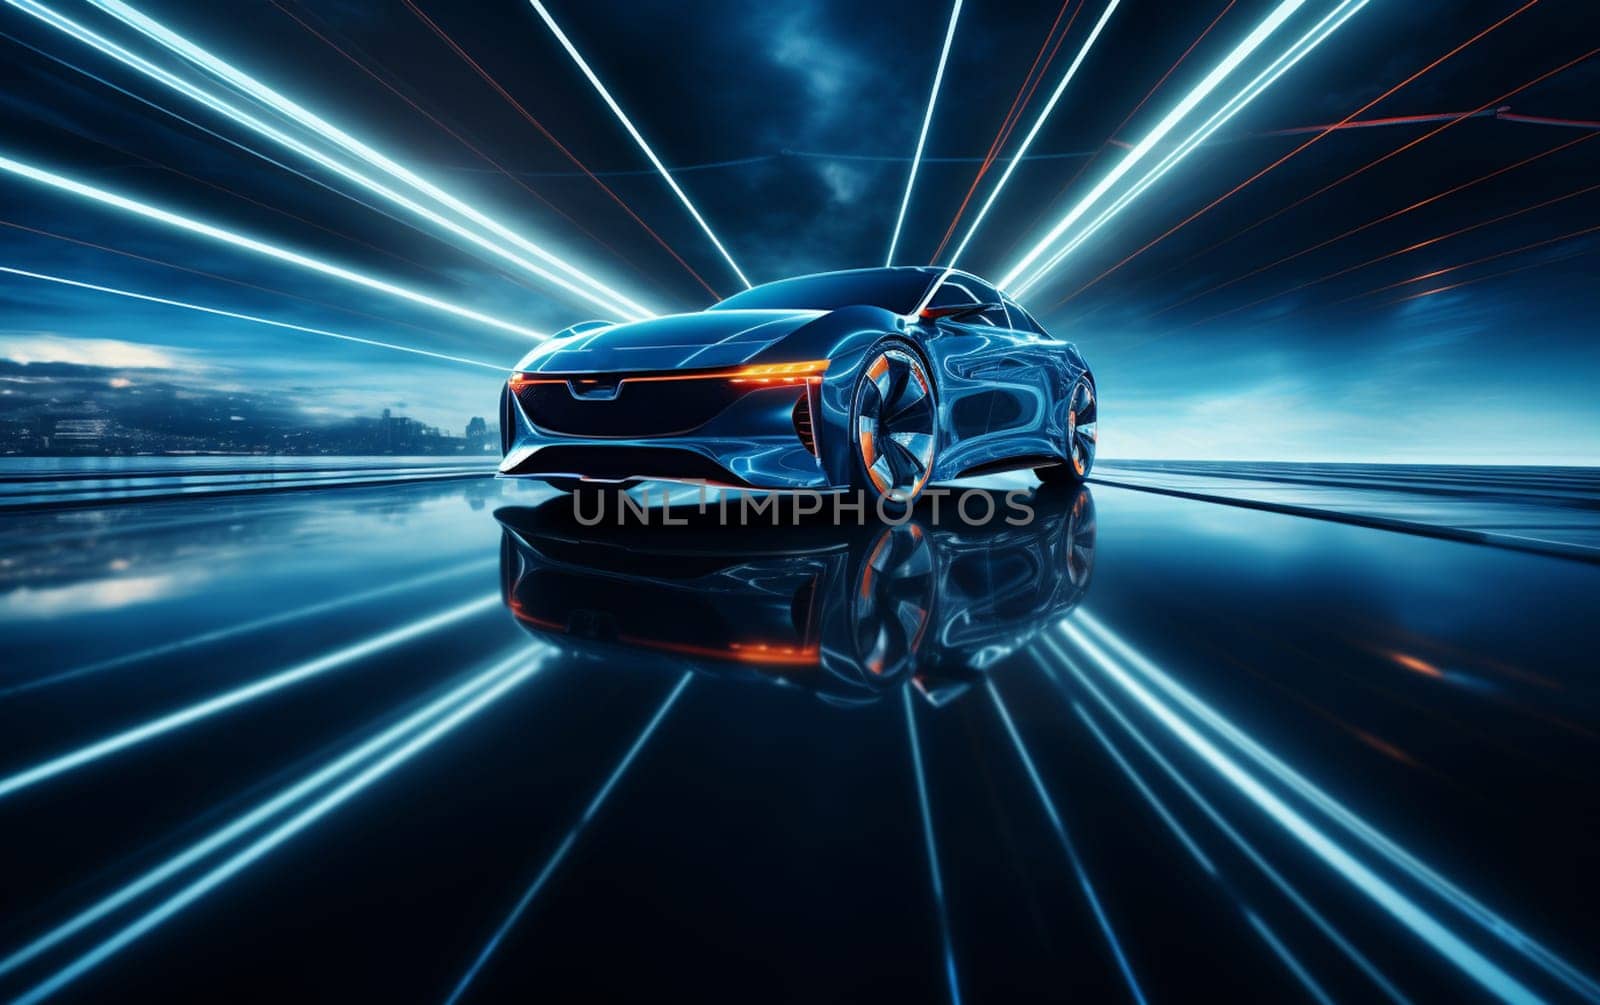 3D Car Model: Sports Car Driving at on a Wet Road on High Speed, Racing Through the Colorful Tunnel With Lights Reflecting Everywhere. Dark Supercar Driving Fast on Highway. VFX Edit. High quality photo